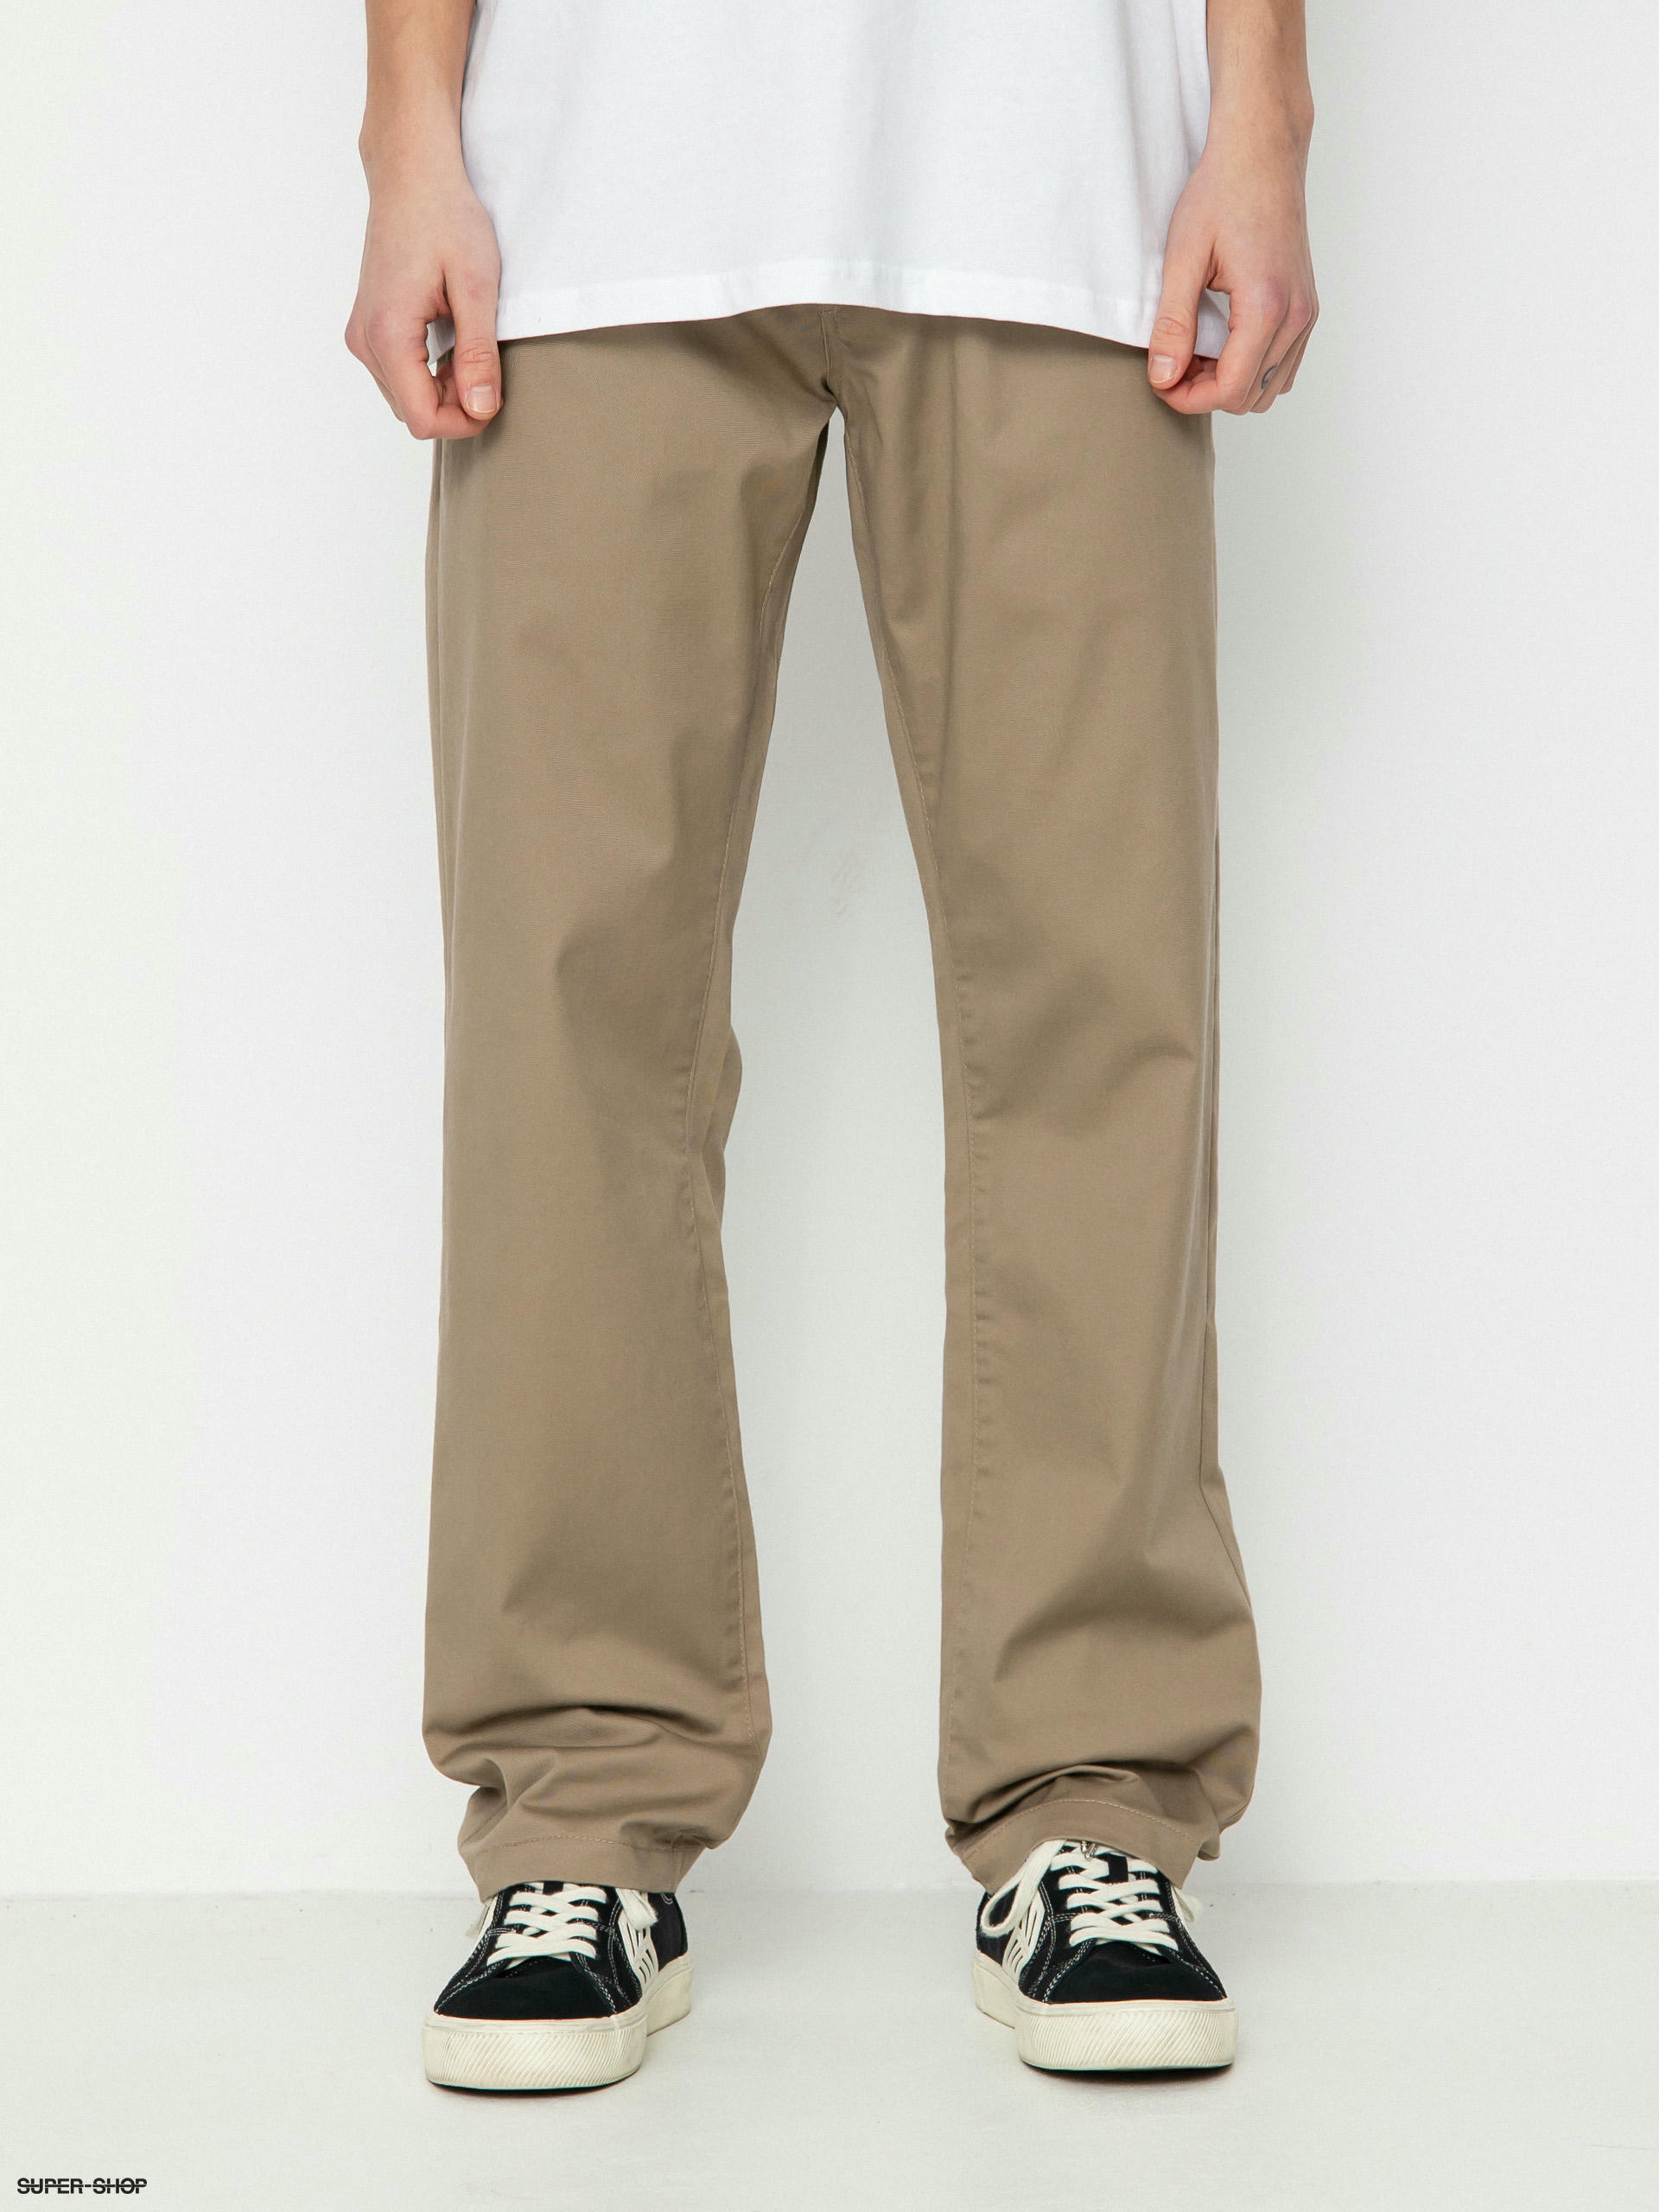 Bought my first pair of mens pants today gap modern khakis straight fit  with flex Open to styling suggestions  rlesbianfashionadvice